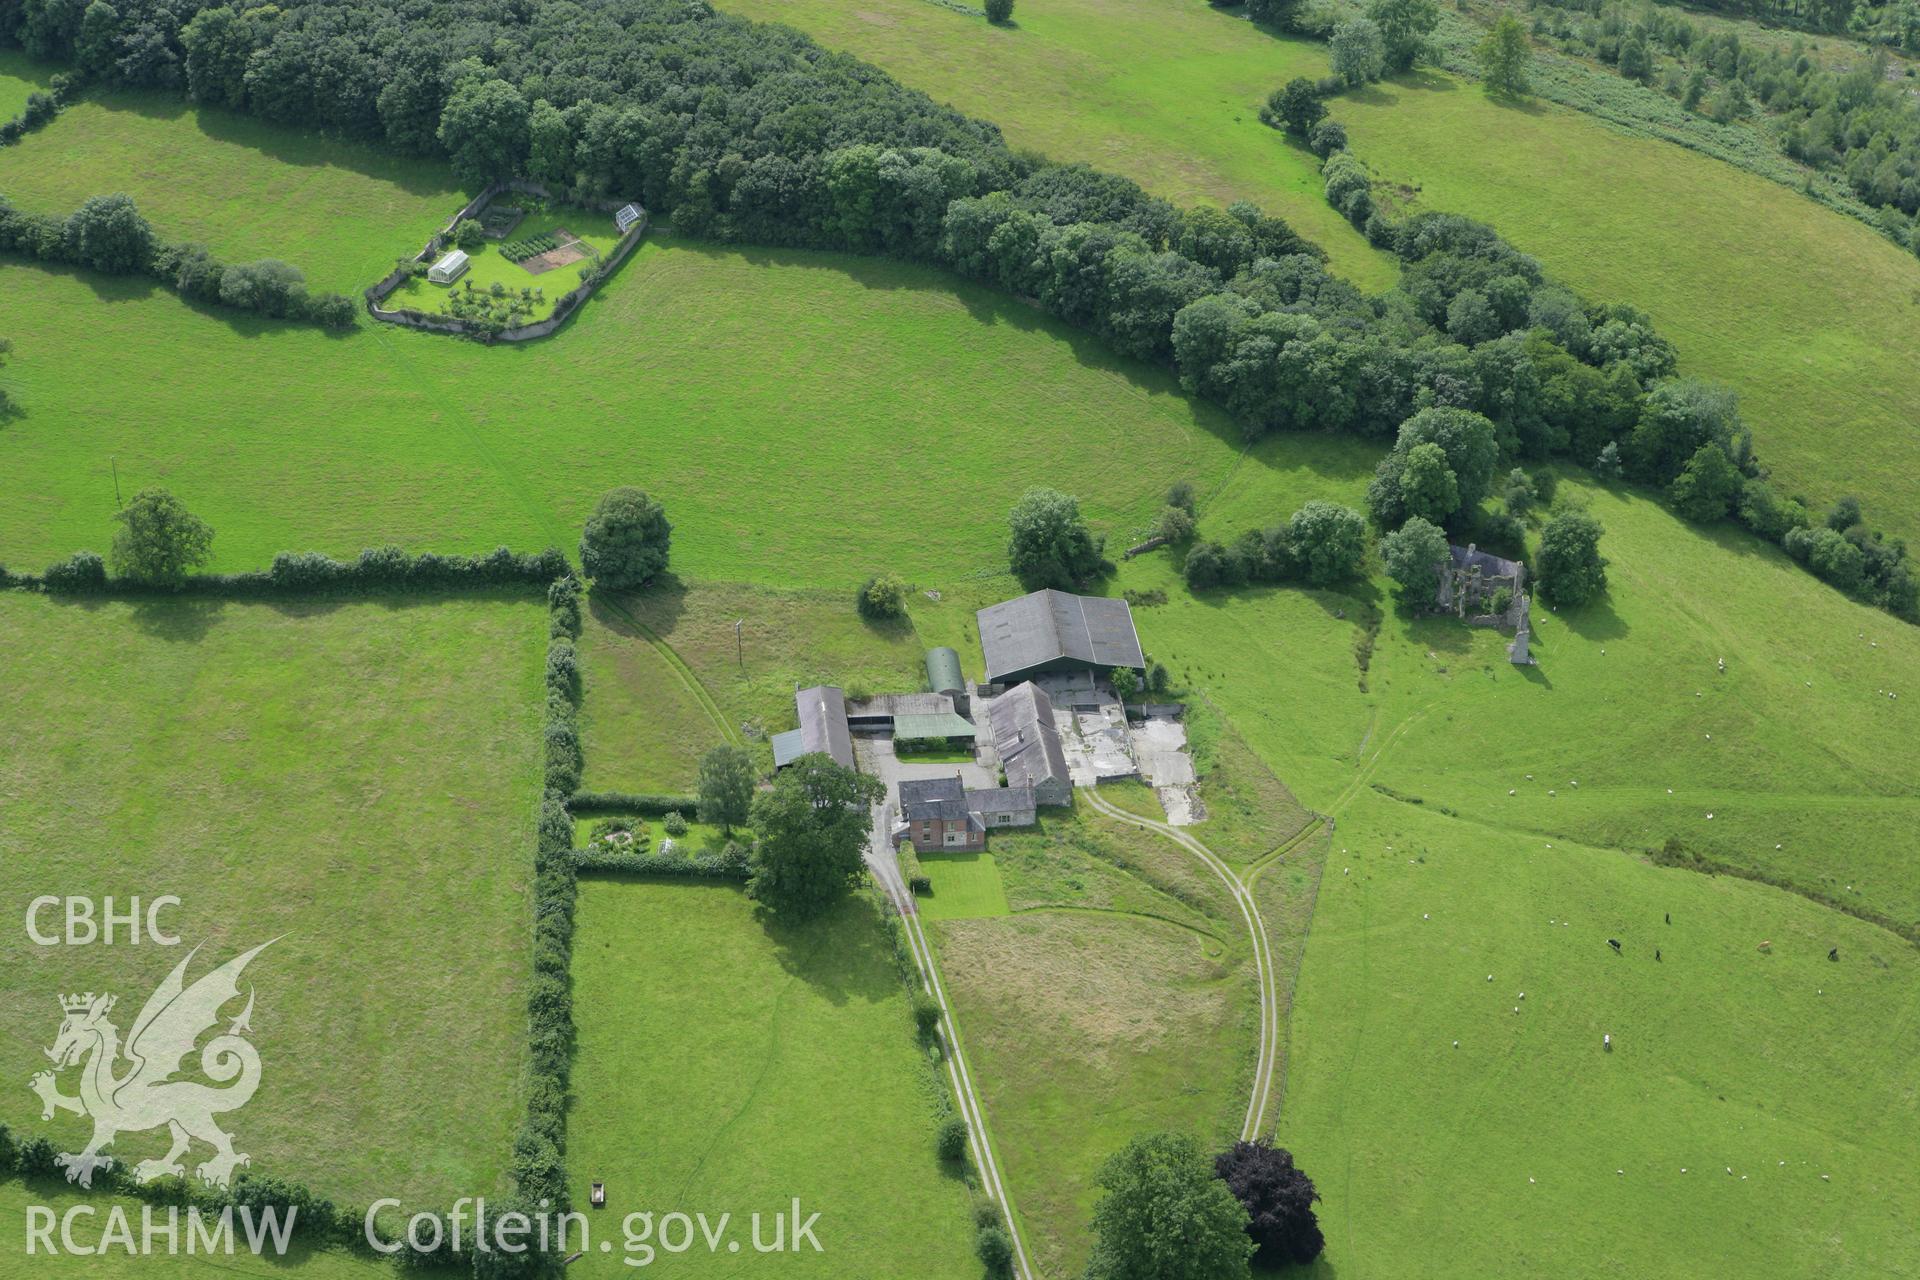 RCAHMW colour oblique aerial photograph of Llwynywormwood House and Garden. Taken on 09 July 2007 by Toby Driver